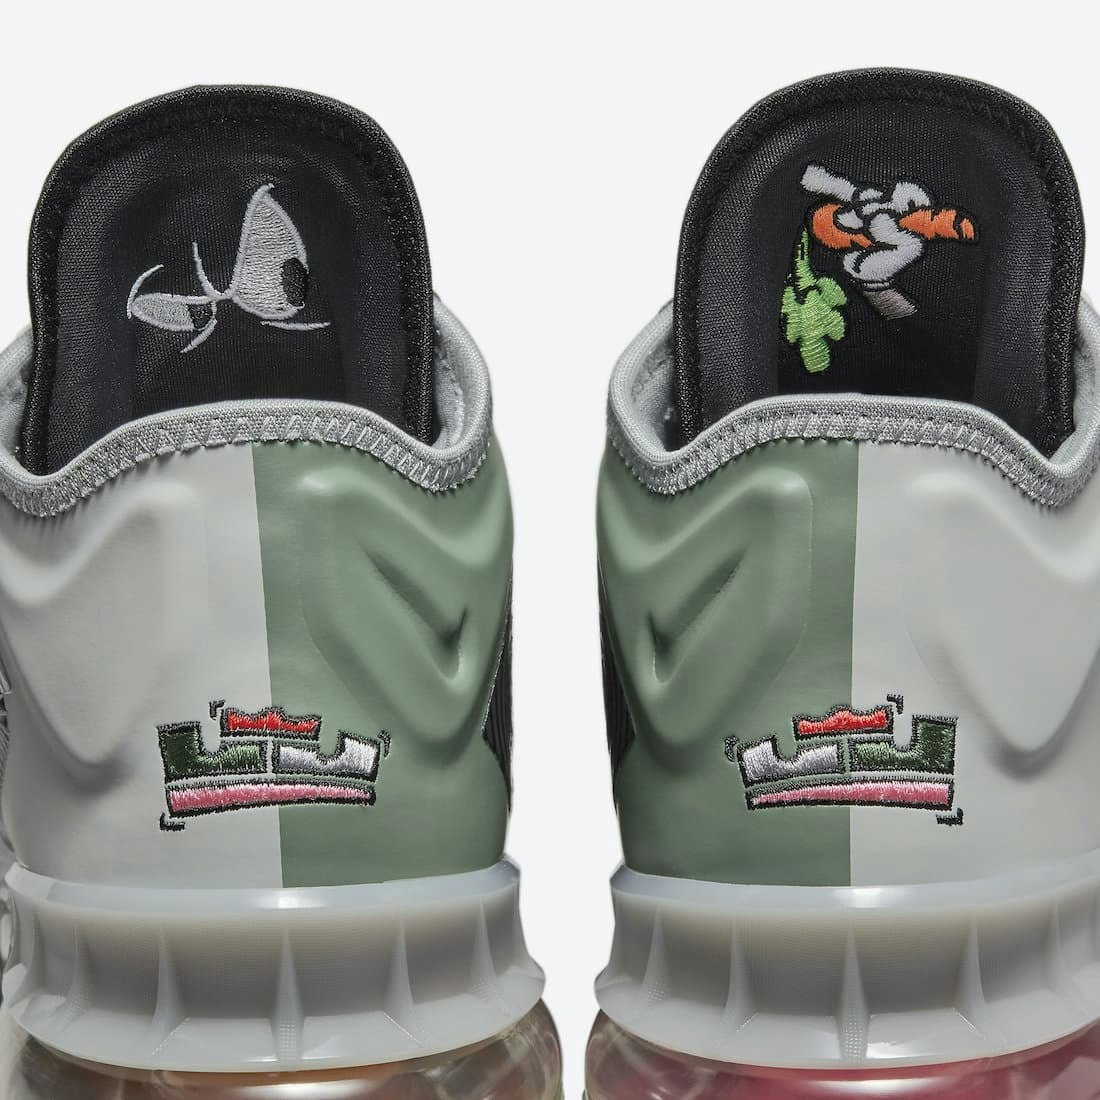 Space Jam x Nike LeBron 18 Low “Bugs Bunny x Marvin The Martian”